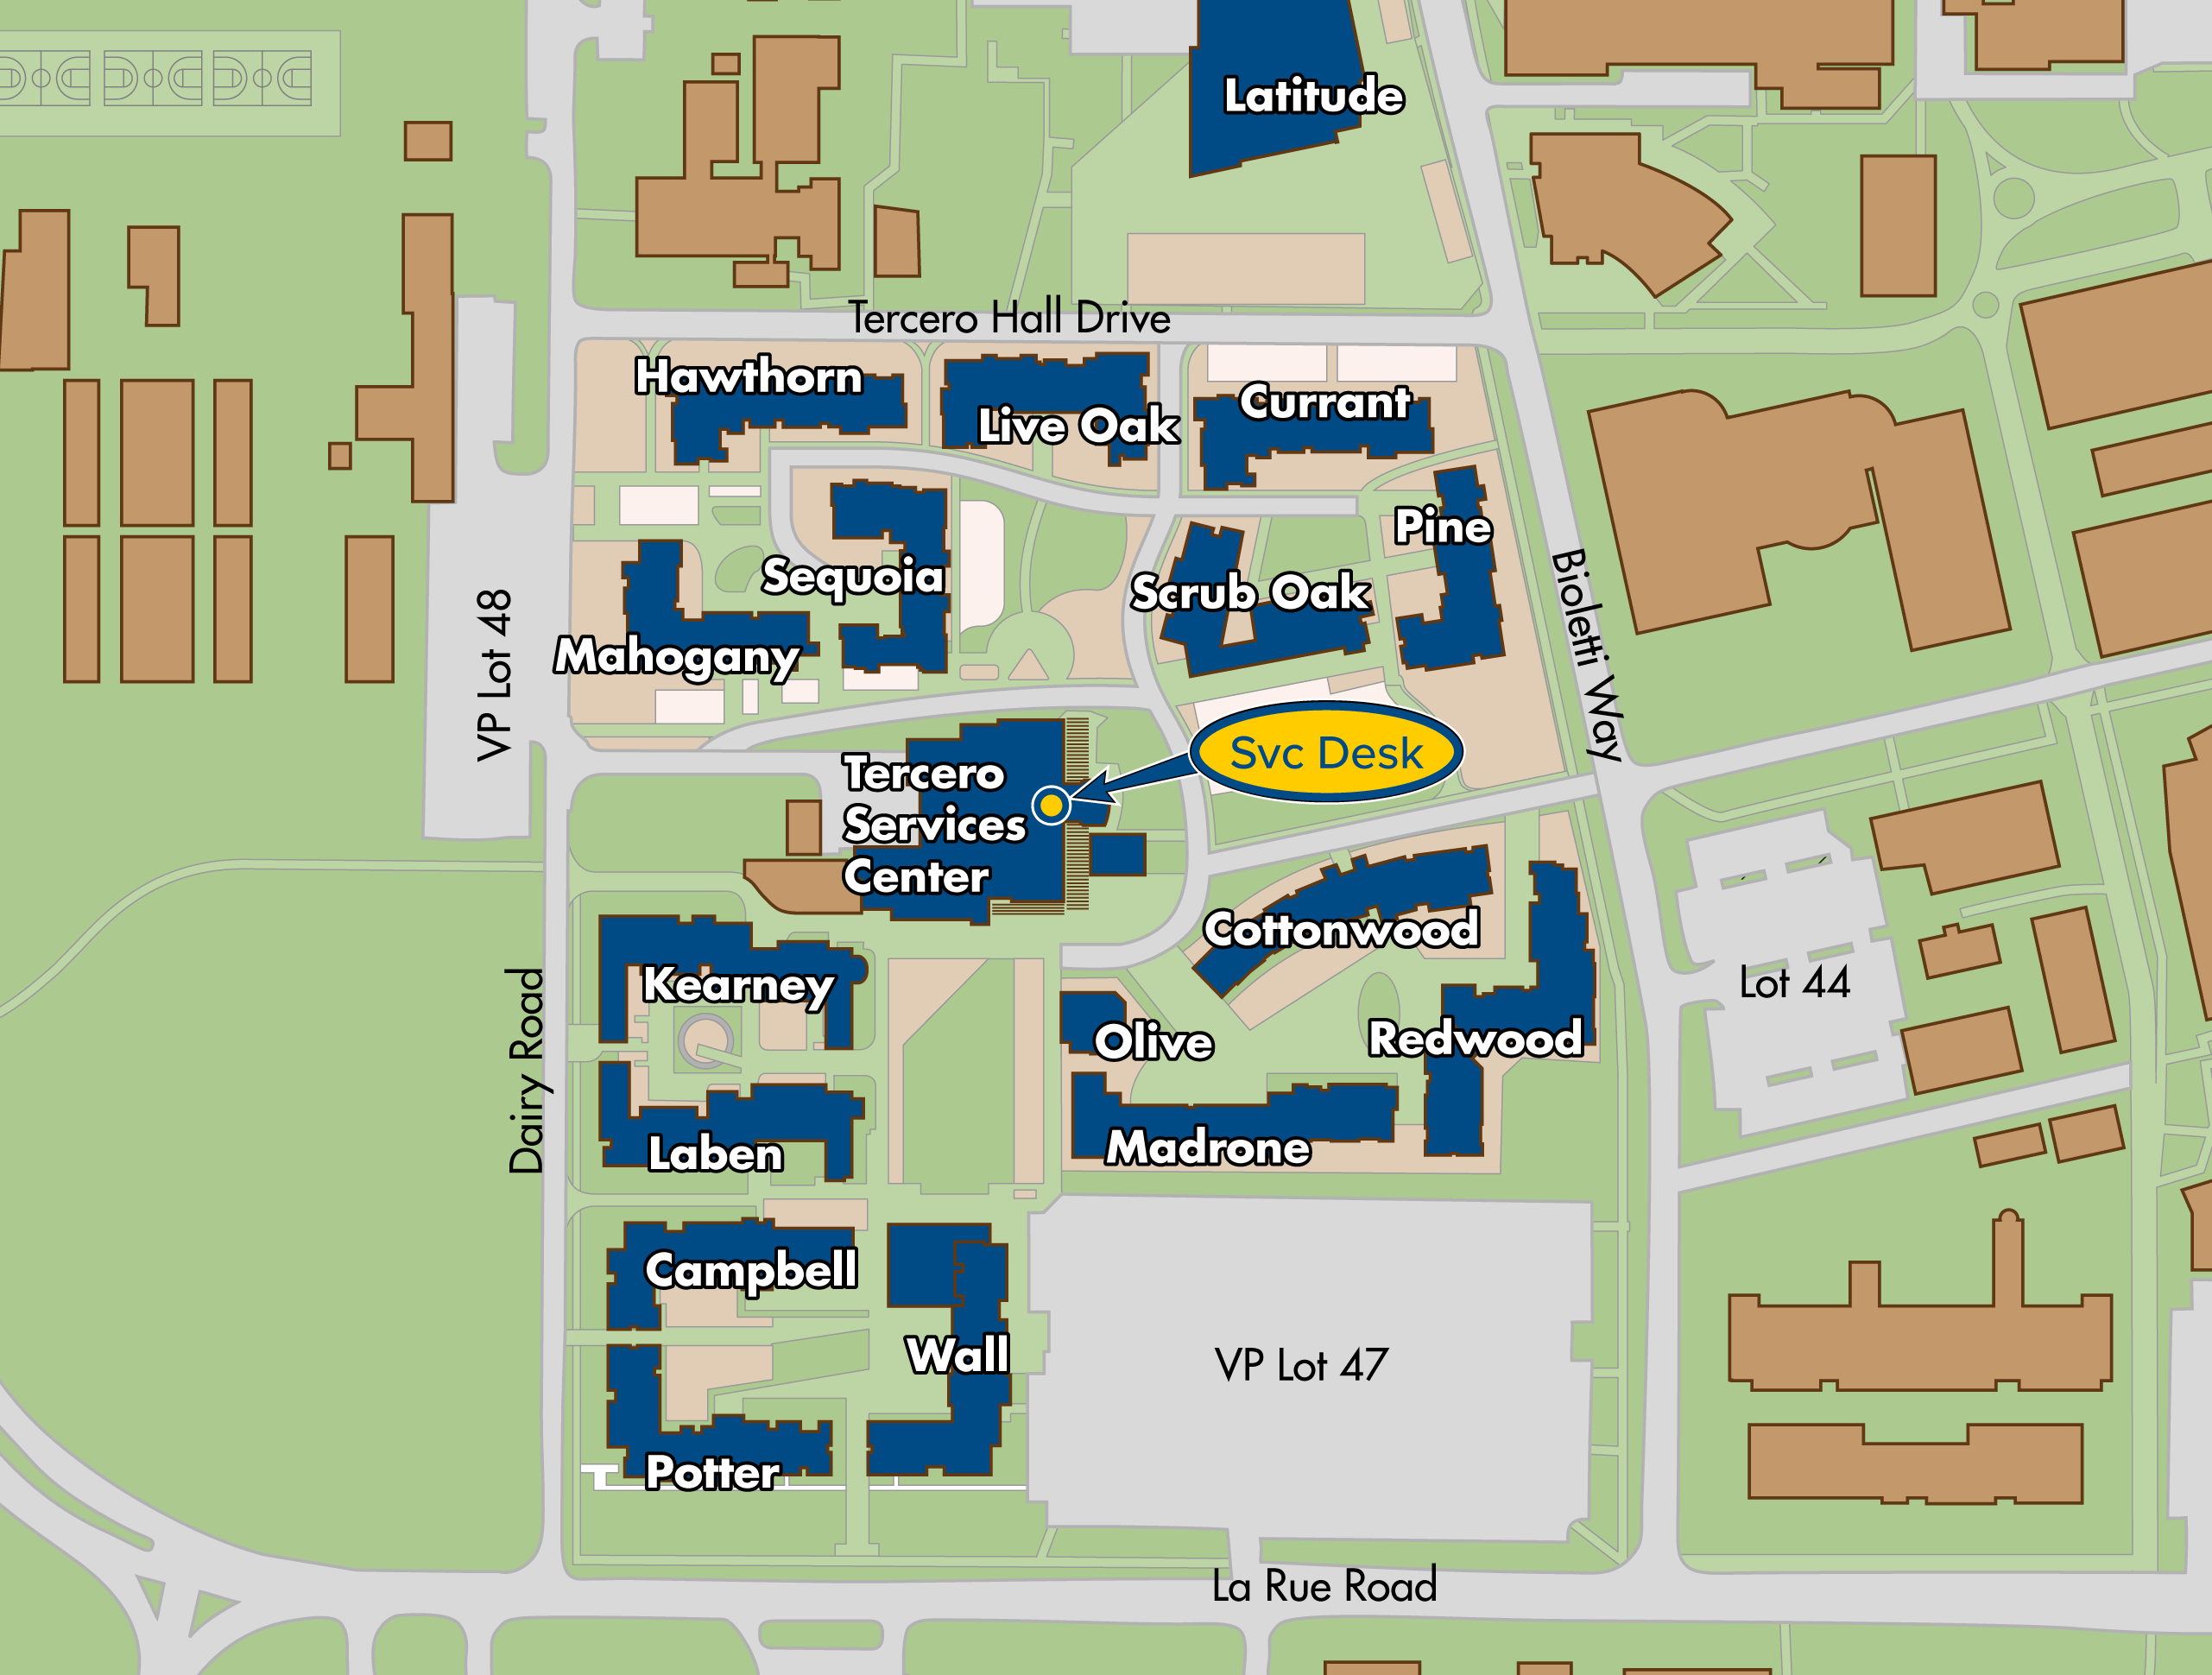 Tercero residence hall area map showing where Campbell, Kearney, Laben, Potter, Wall, Pine, Currant, Scrub Oak, Live Oak, Sequoia, Mahogany, and Hawthorn Halls are located on the UC Davis campus